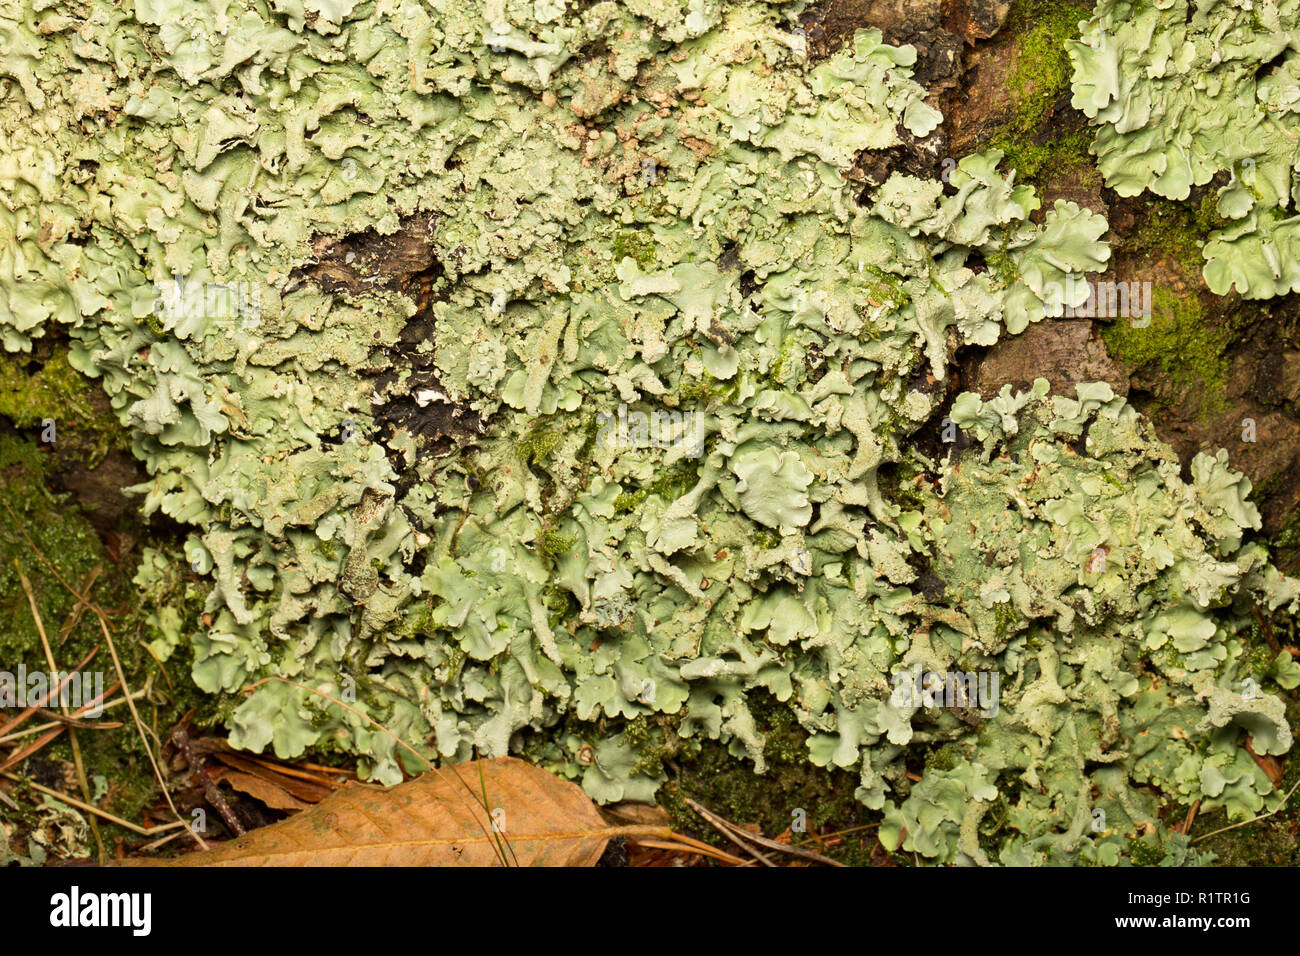 Common Greenshield lichen, Flavoparmelia caperata, growing on the base of a tree in woodlands in Dorset England UK GB Stock Photo